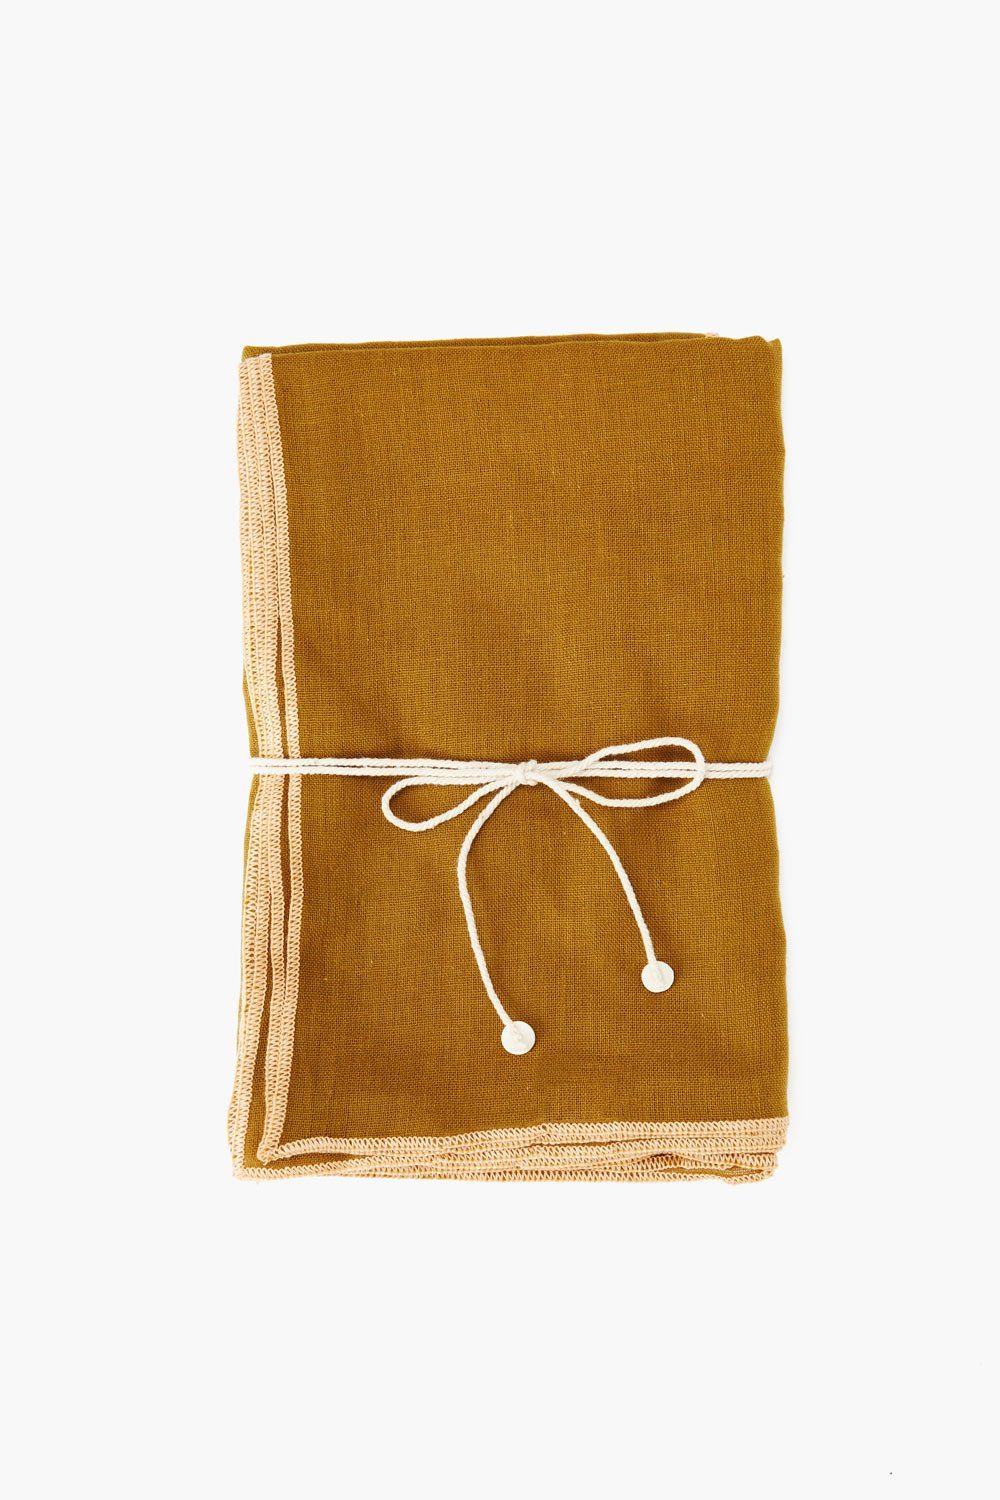 100% COTTON CONTRAST STITCHED NAPKIN/4 - Kingfisher Road - Online Boutique